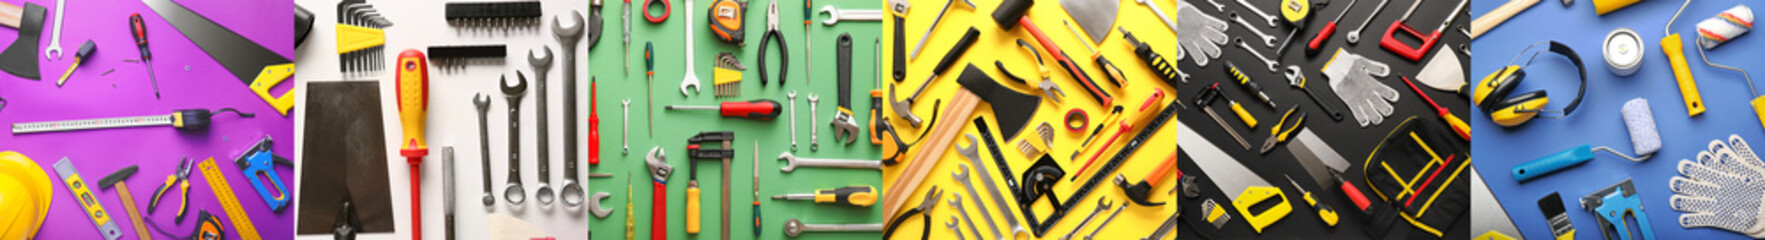 Collage with many construction tools on color background, top view